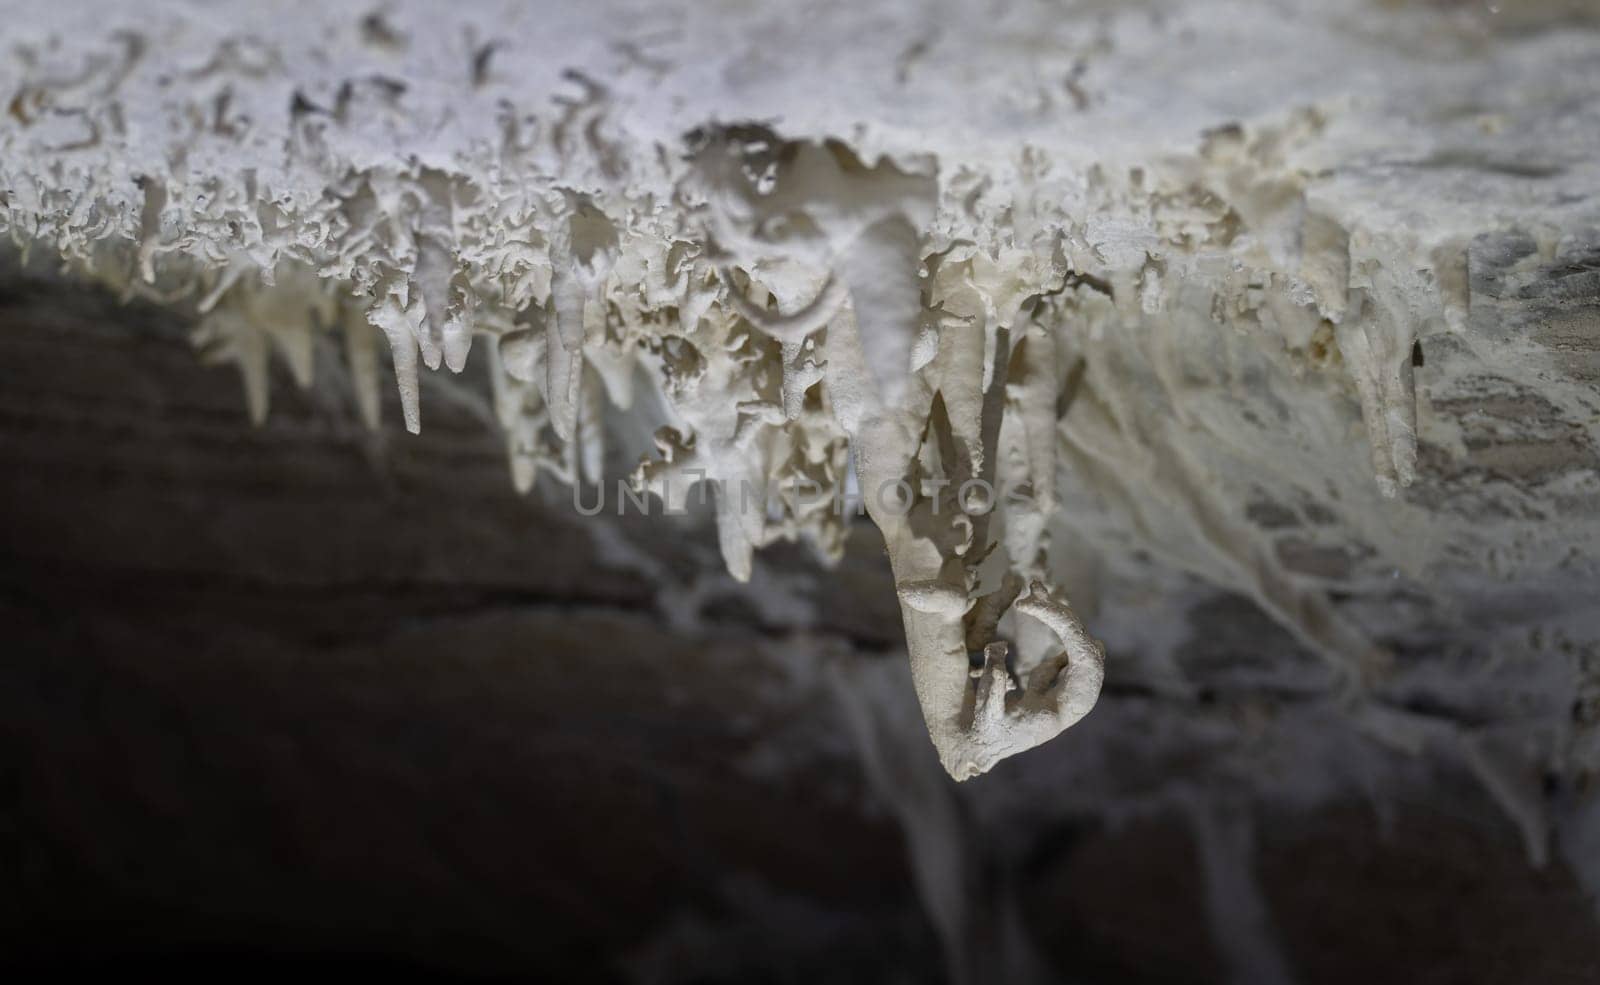 Intricate Cave Formations Displayed in Subterranean Landscape by FerradalFCG